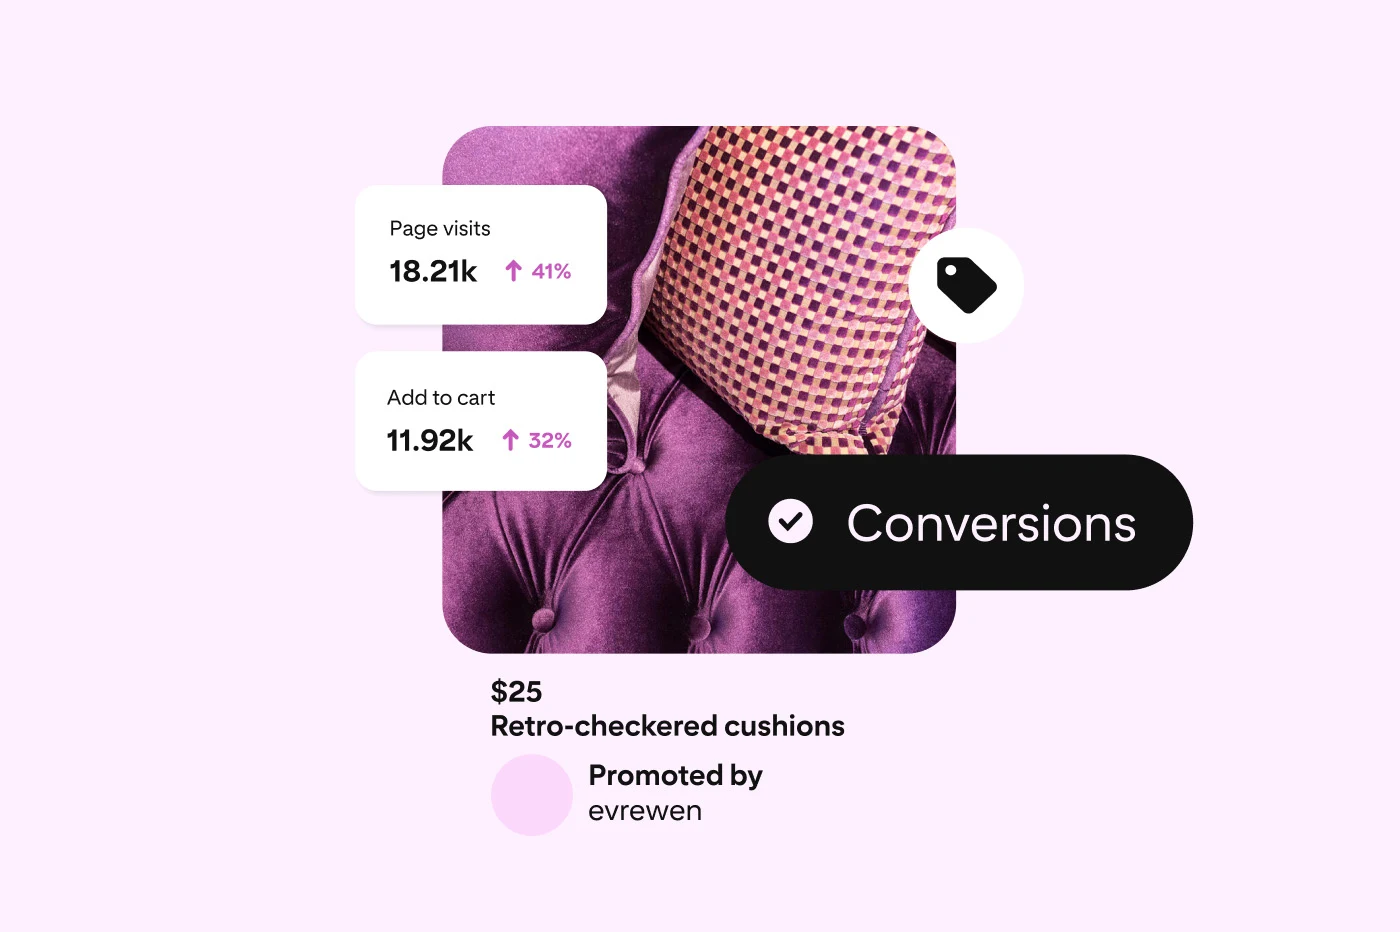 A Pin for headphones worn by a Black man in a grey hoodie who is dancing and a Pin for a metallic jacket worn by a white woman. The Pins are on a pink background. There is a 'Page visit' button and an 'Add to cart' button.